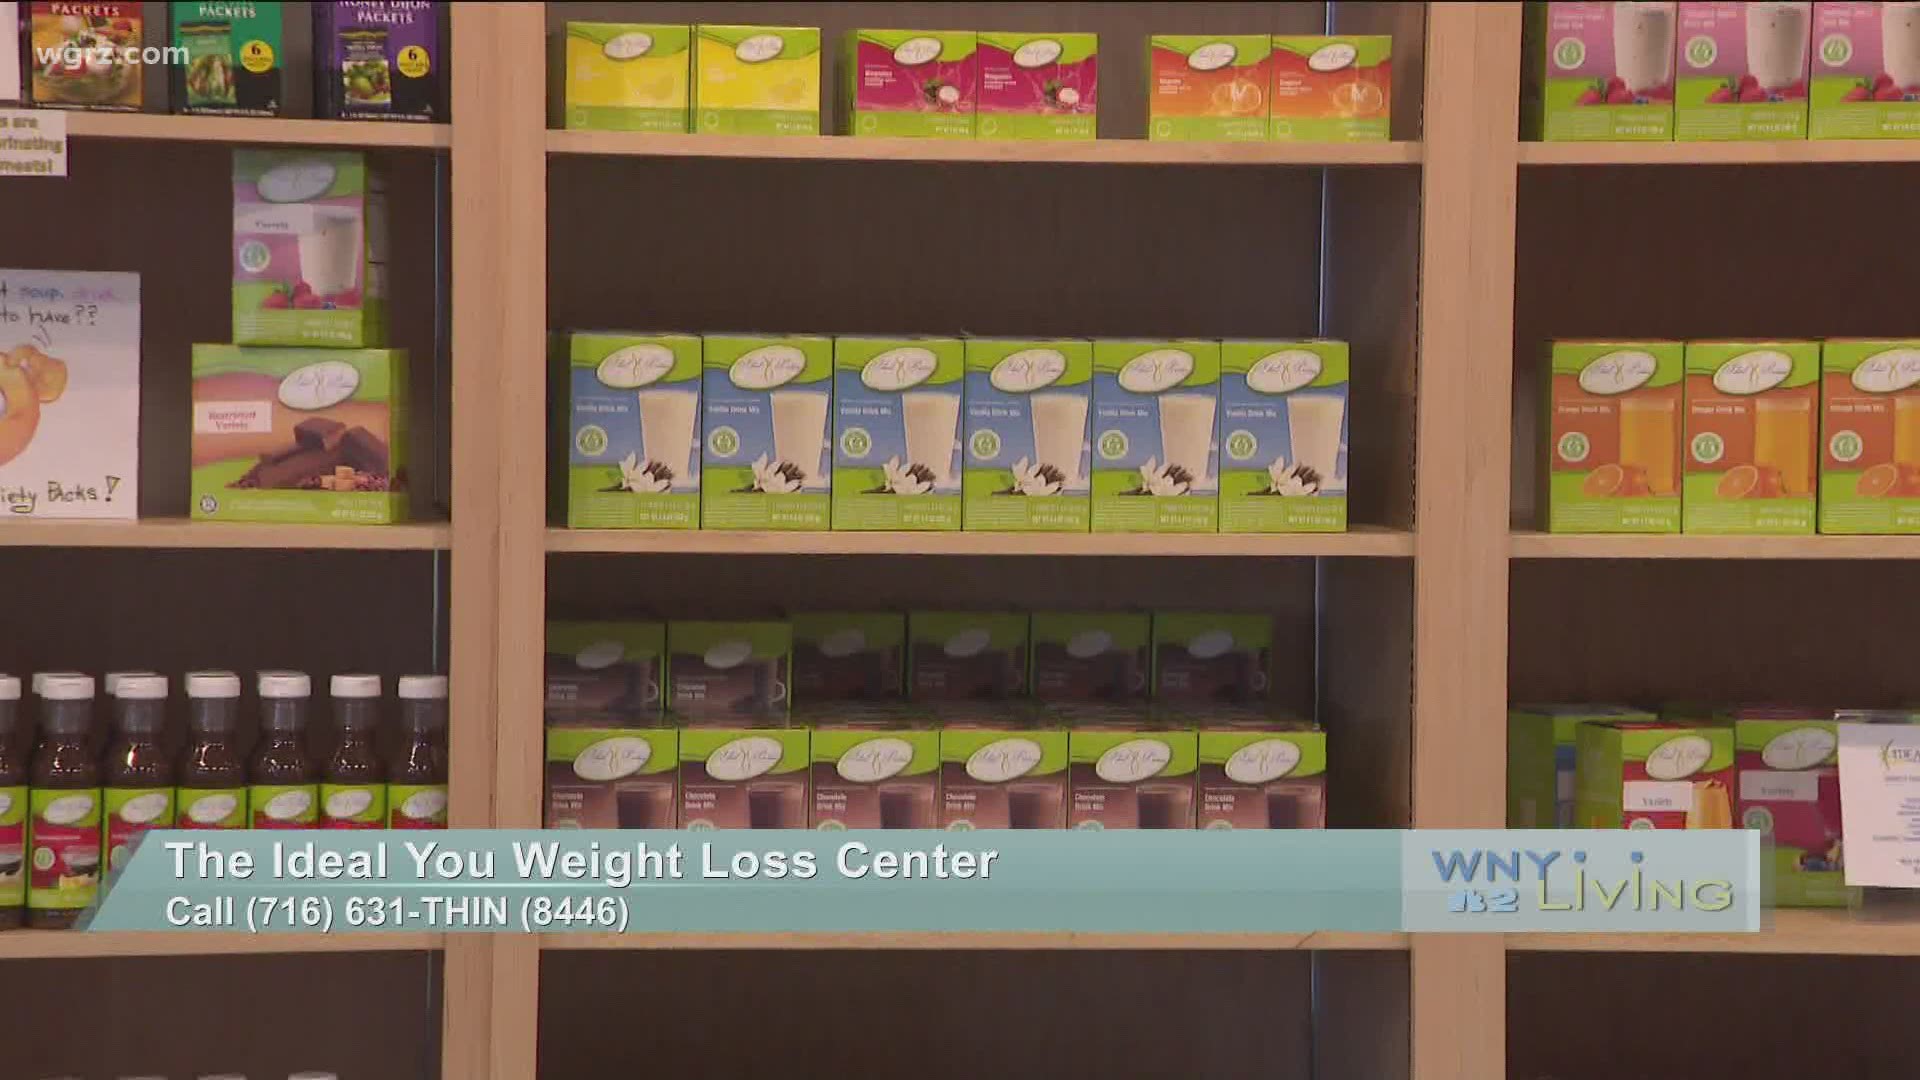 WNY Living - August 1 - The Ideal You Weight Loss Center (THIS VIDEO IS SPONSORED BY THE IDEAL YOU WEIGHT LOSS CENTER)